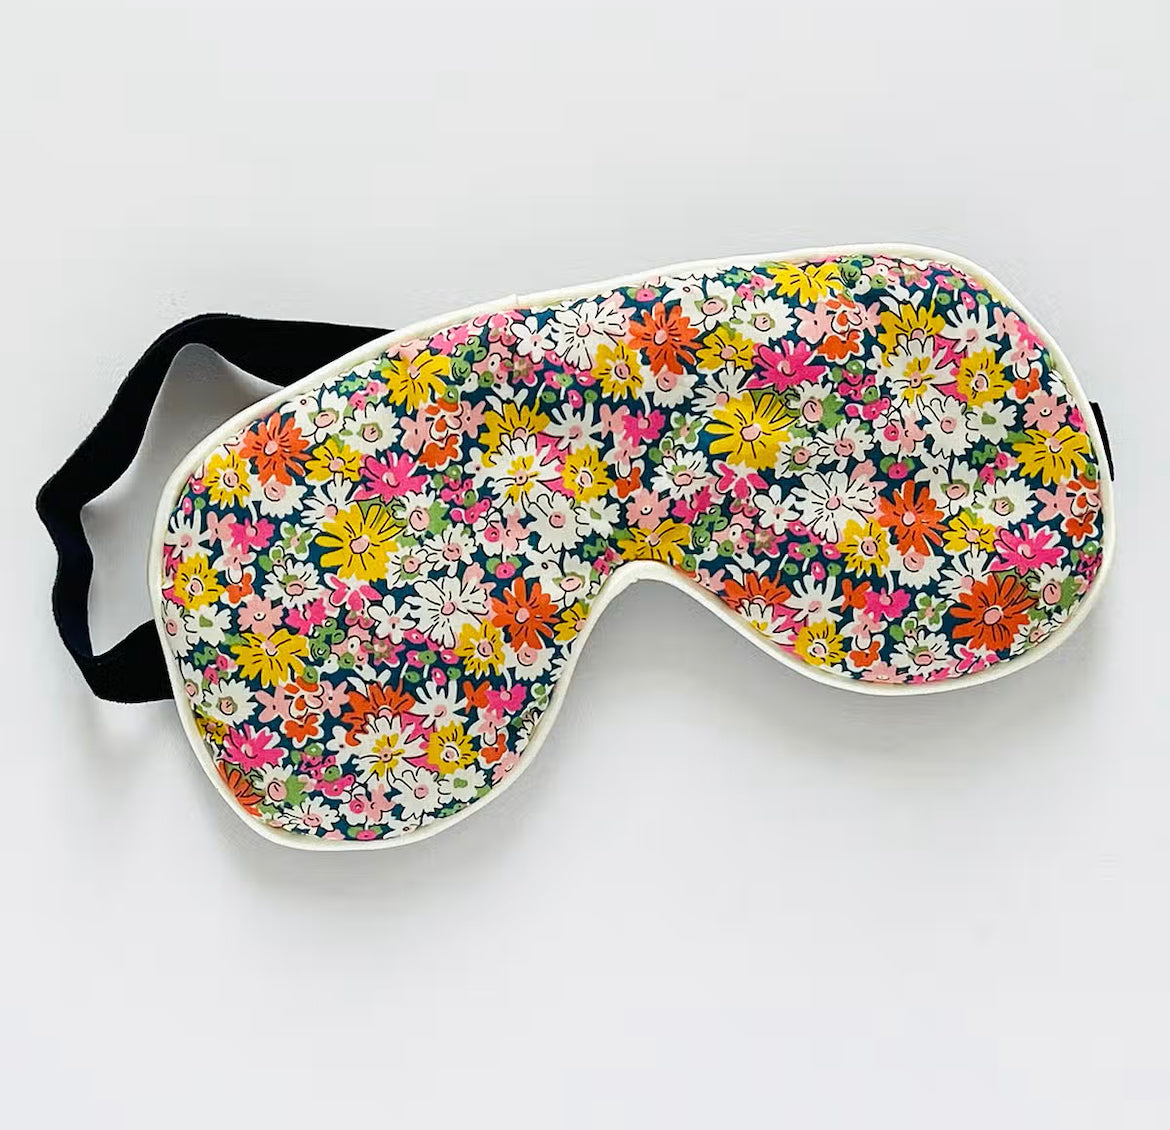 Liberty Lavender Eyemask - Libby Yellow - The Bristol Artisan Handmade Sustainable Gifts and Homewares.